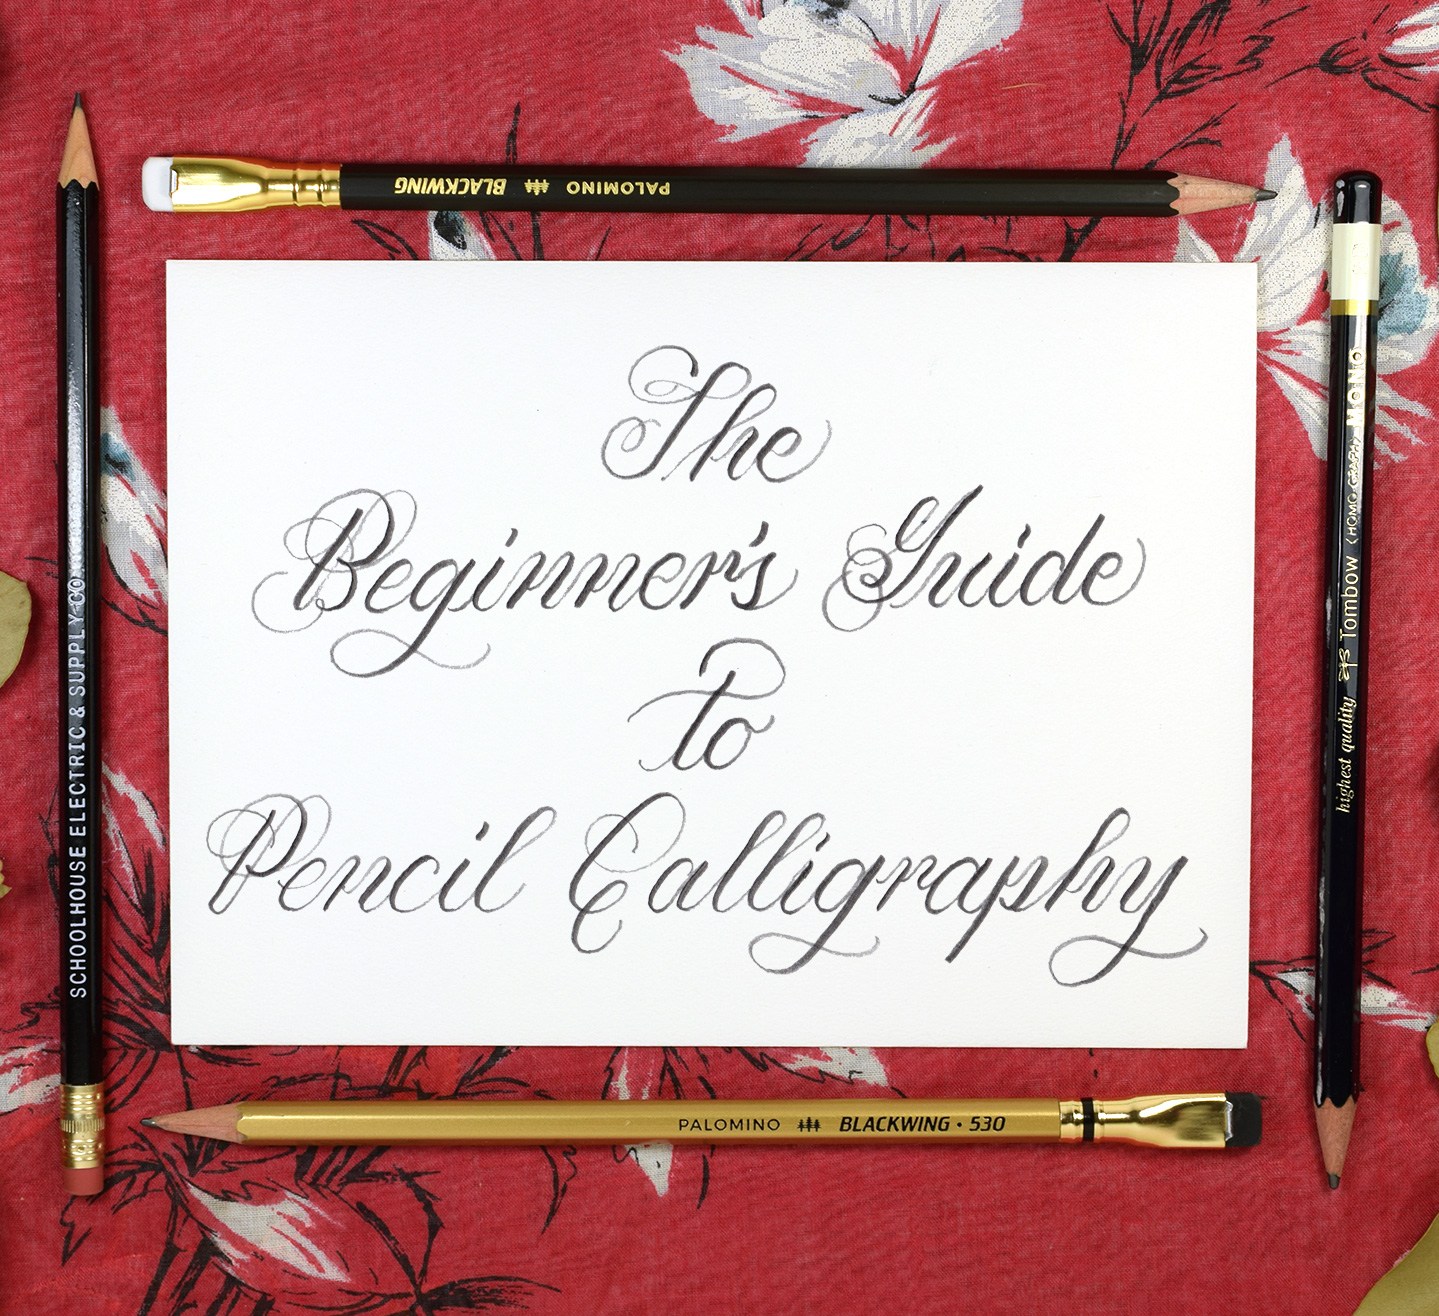 The Beginner’s Guide to Pencil Calligraphy